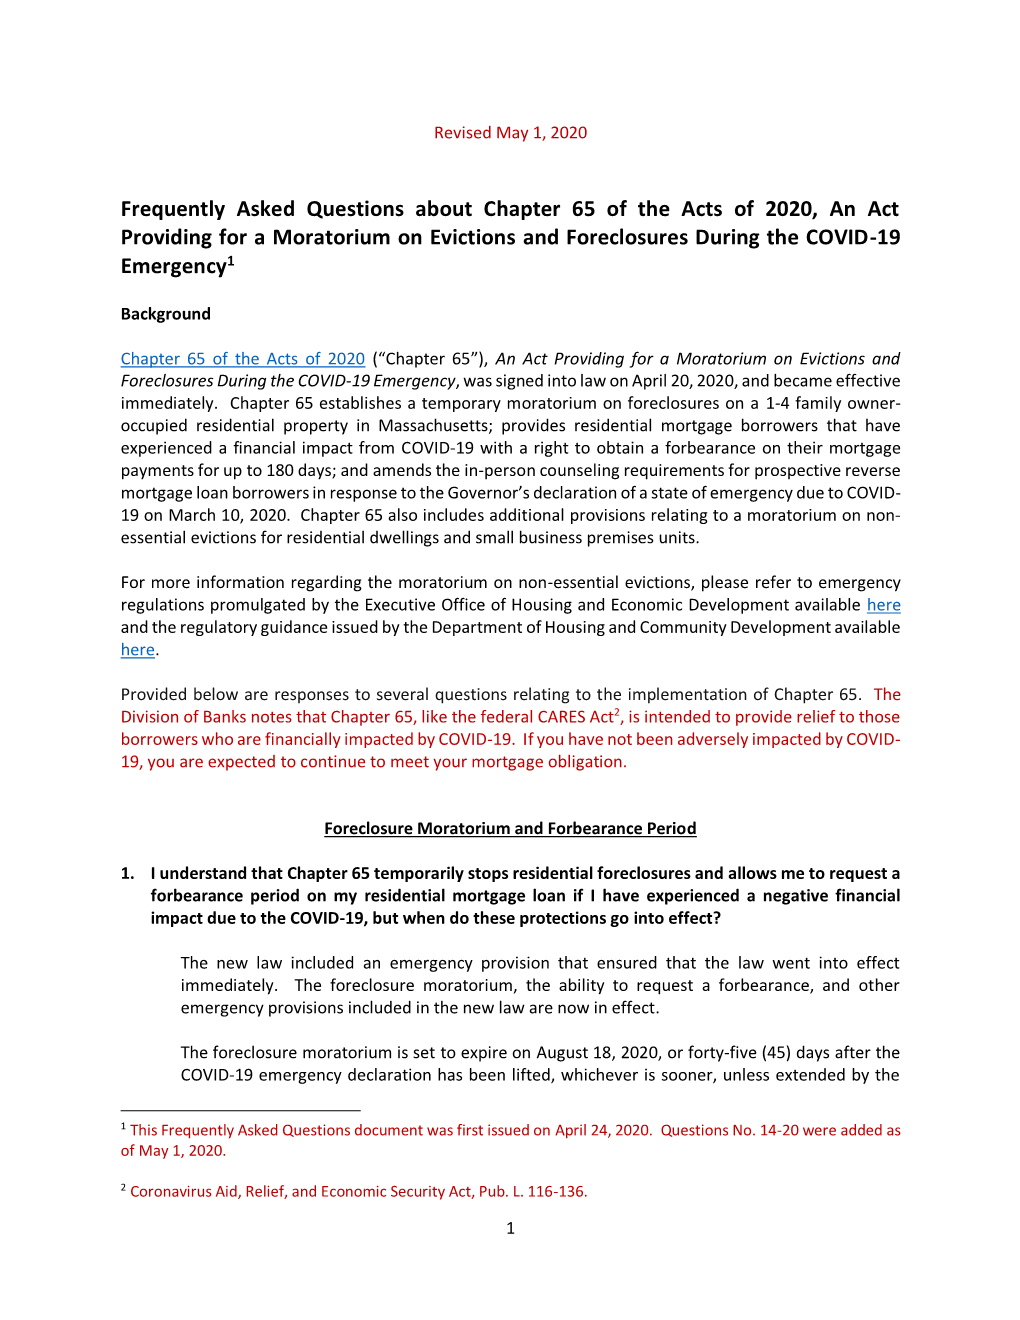 Frequently Asked Questions About Chapter 65 of the Acts of 2020, an Act Providing for a Moratorium on Evictions and Foreclosures During the COVID-19 Emergency1